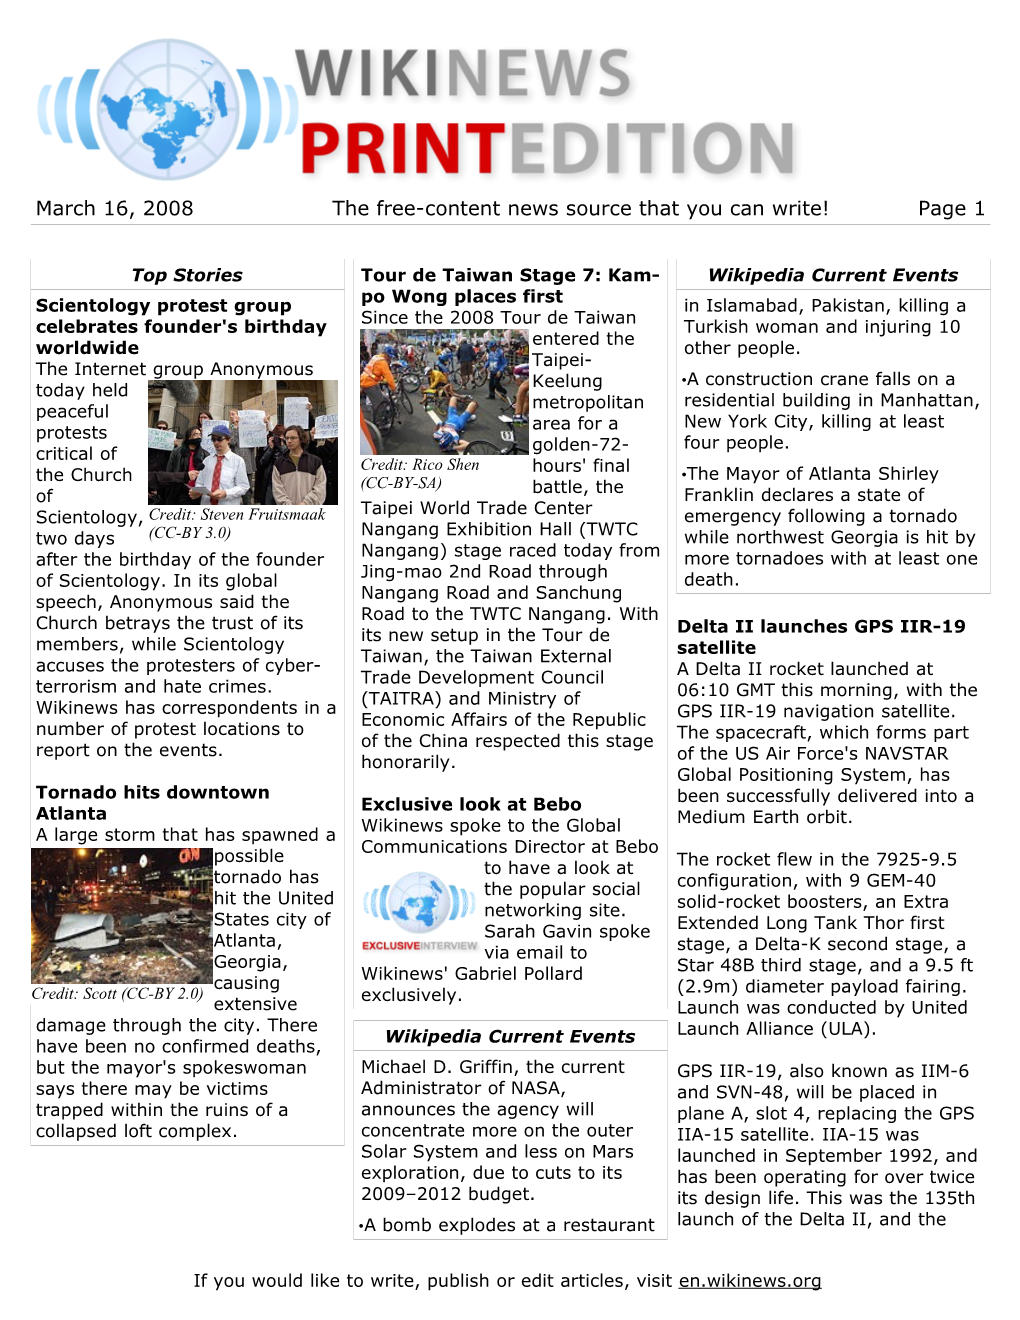 March 16, 2008 the Free-Content News Source That You Can Write! Page 1